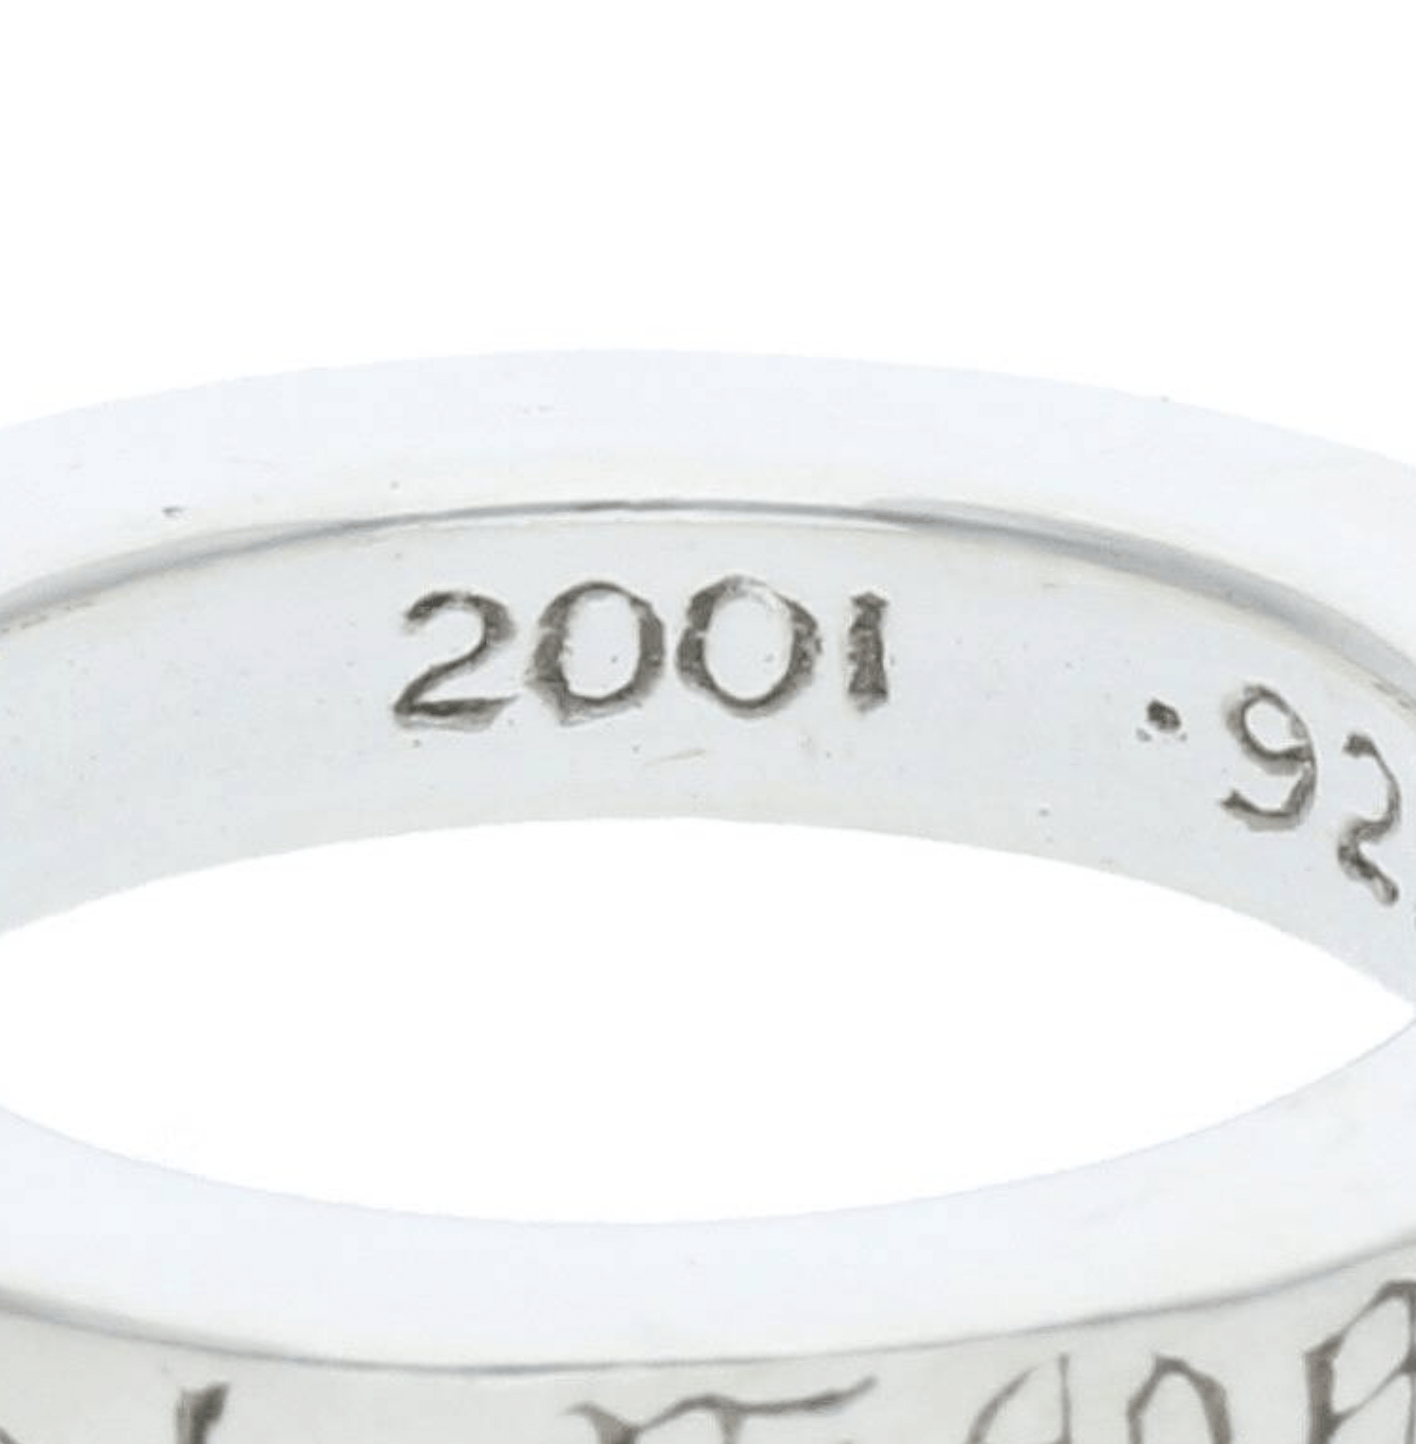 Chrome Hearts CHROME HEARTS 3MM SPACER FUCK YOU RING US 3 | Grailed